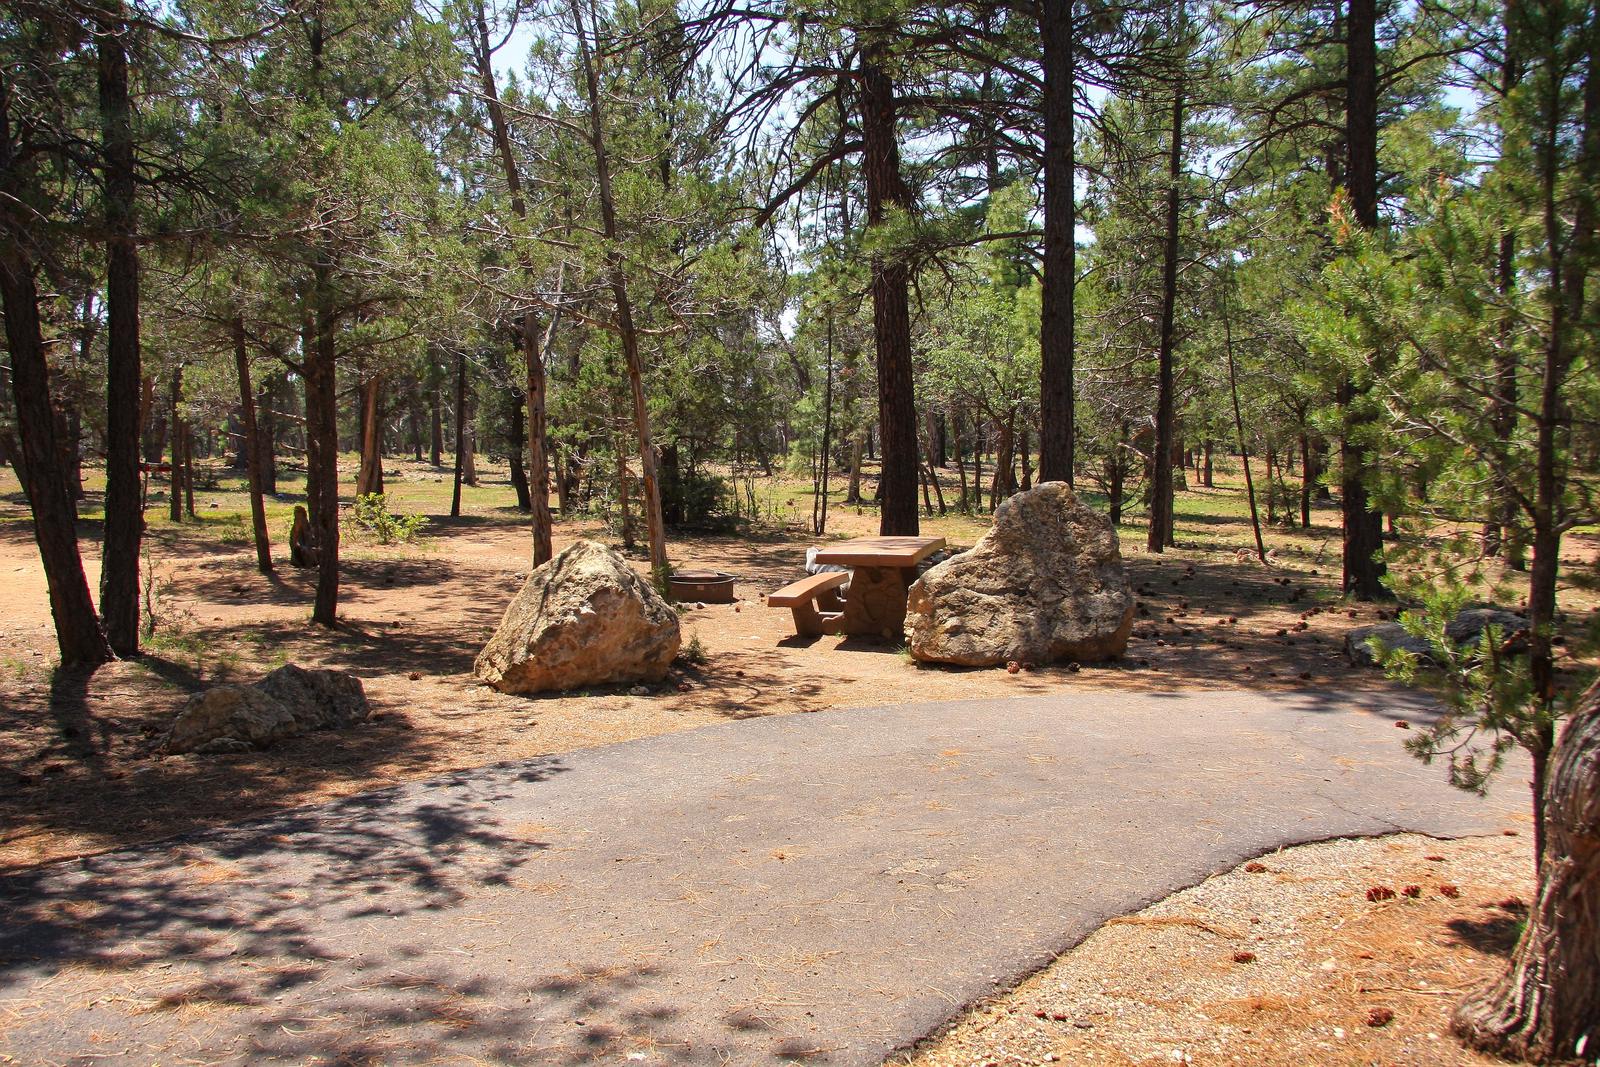 Picnic table, fire pit, and parking spot, Mather CampgroundPicnic table, fire pit, and parking spot for Juniper Loop 150, Mather Campground